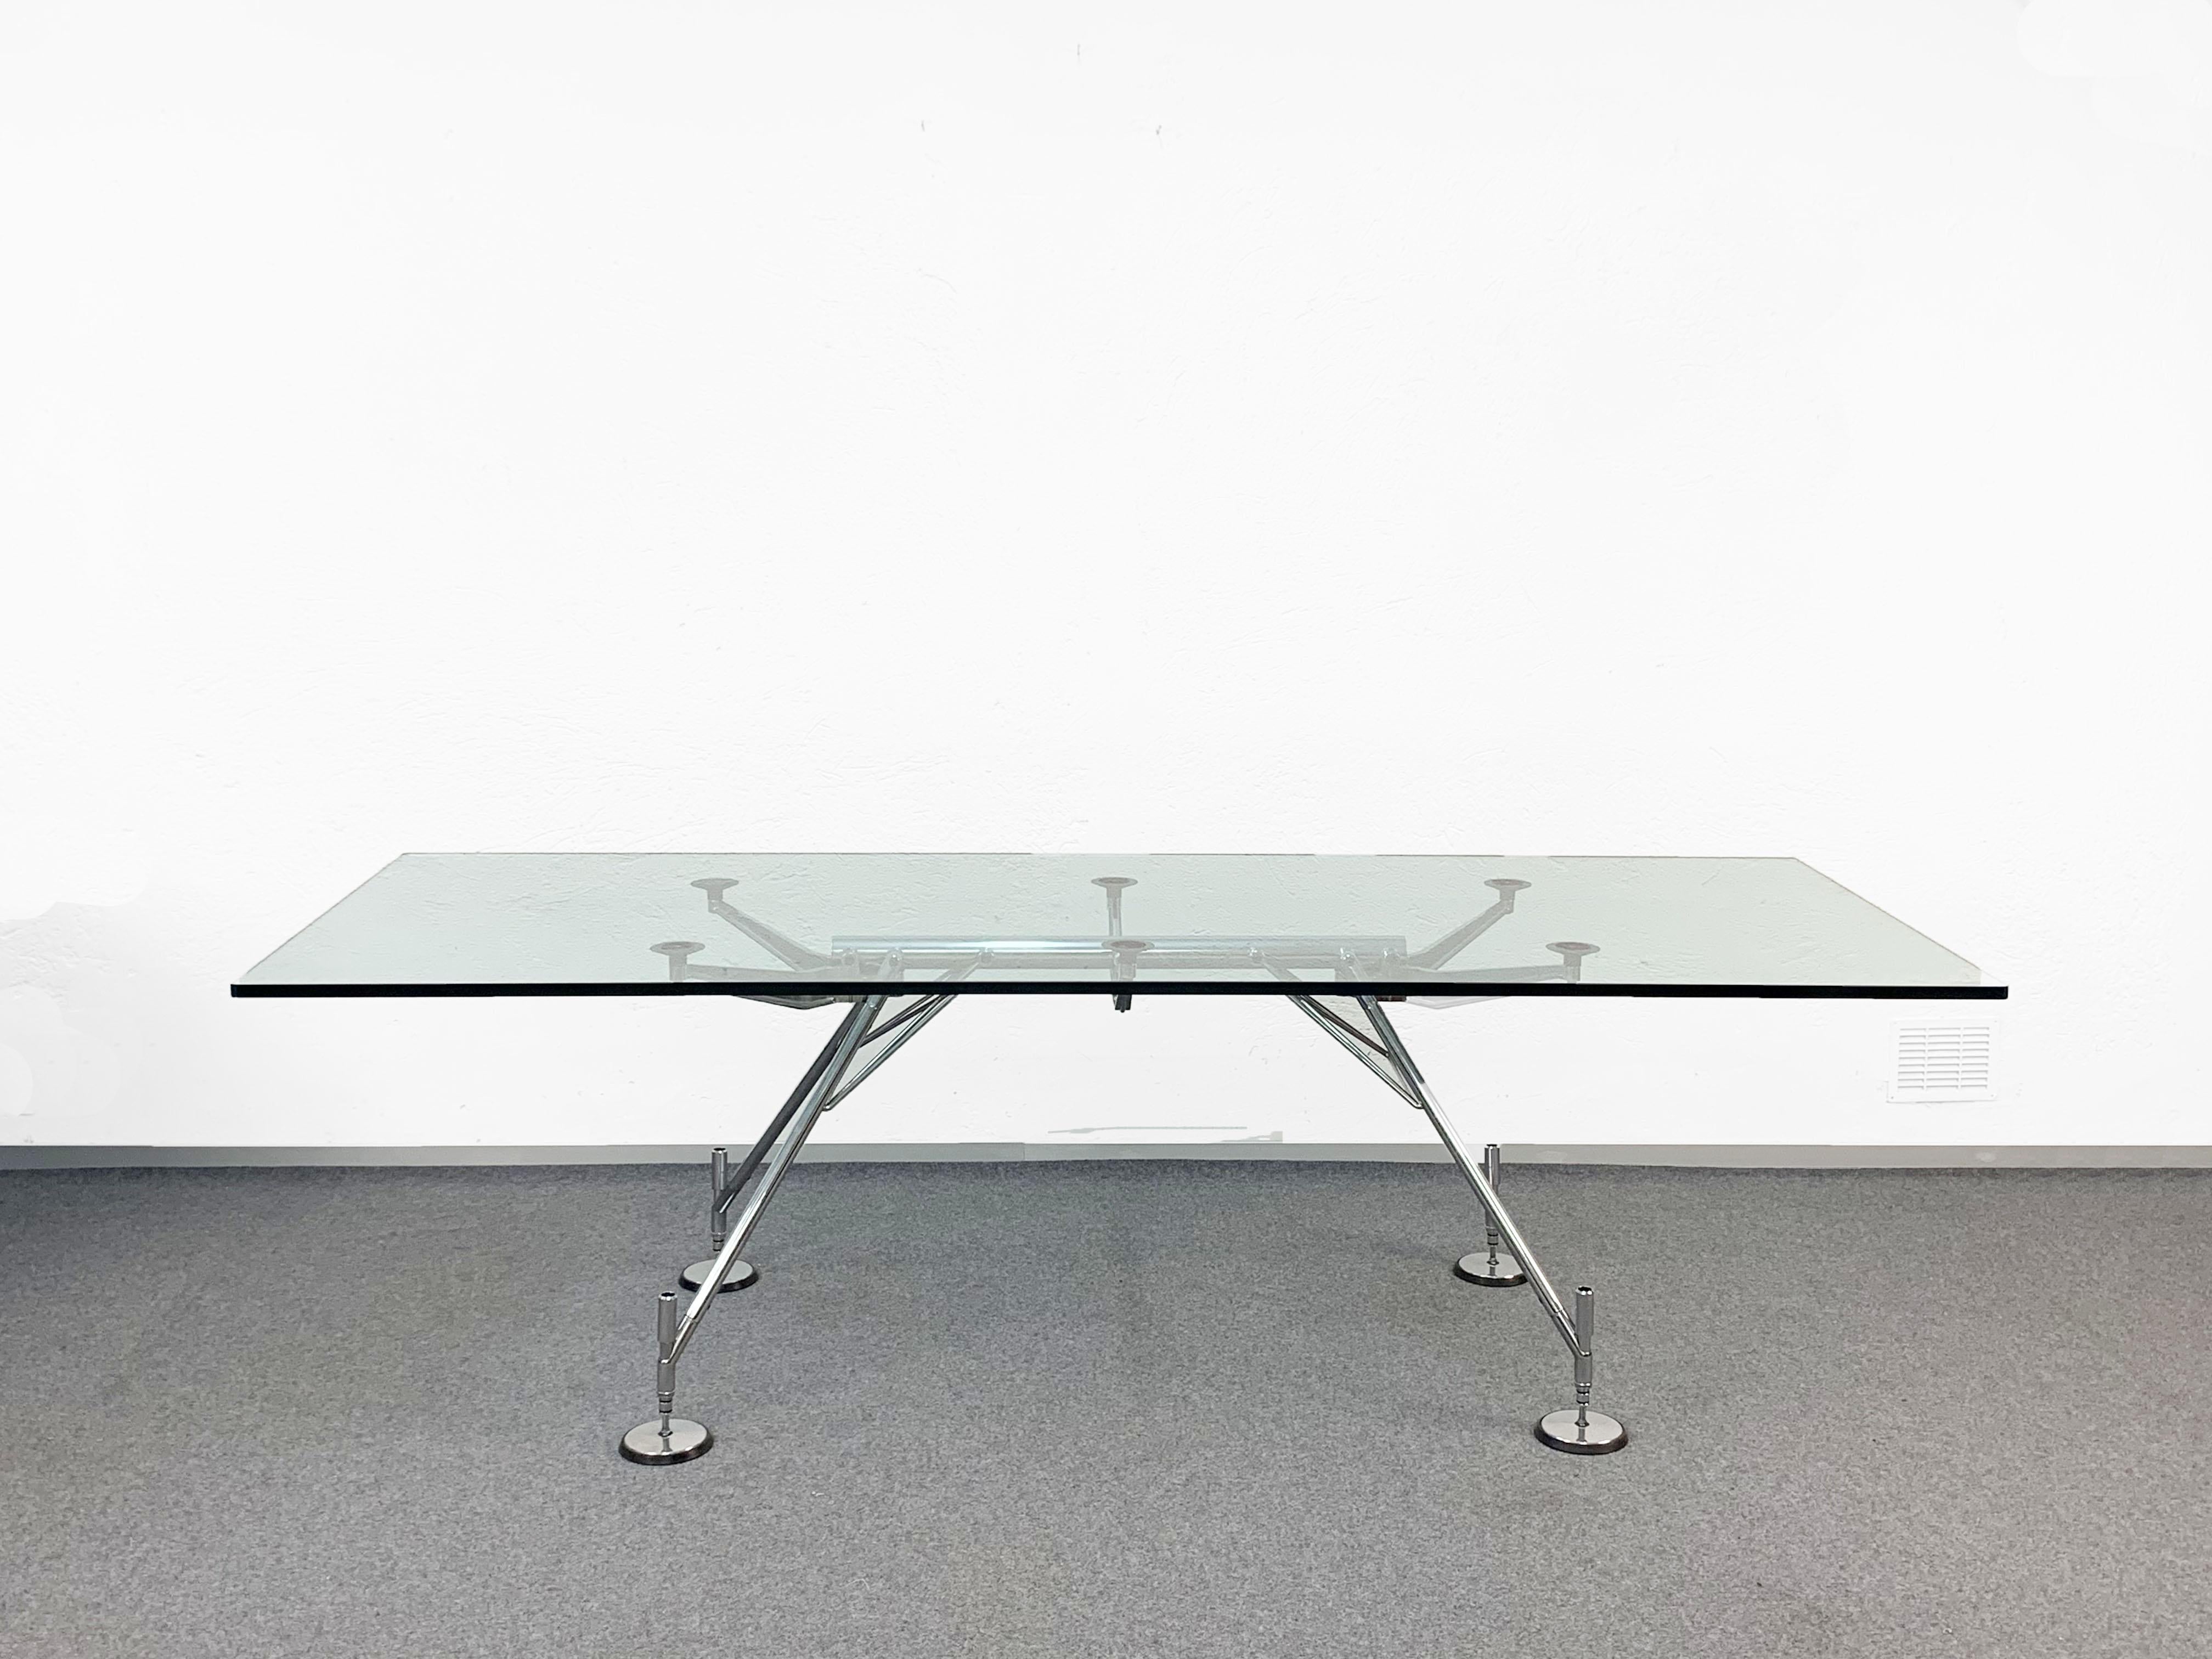 Late 19th Century Nomos Table 1986 by Norman Foster for Tecno Italy 1980s Dining or Conference